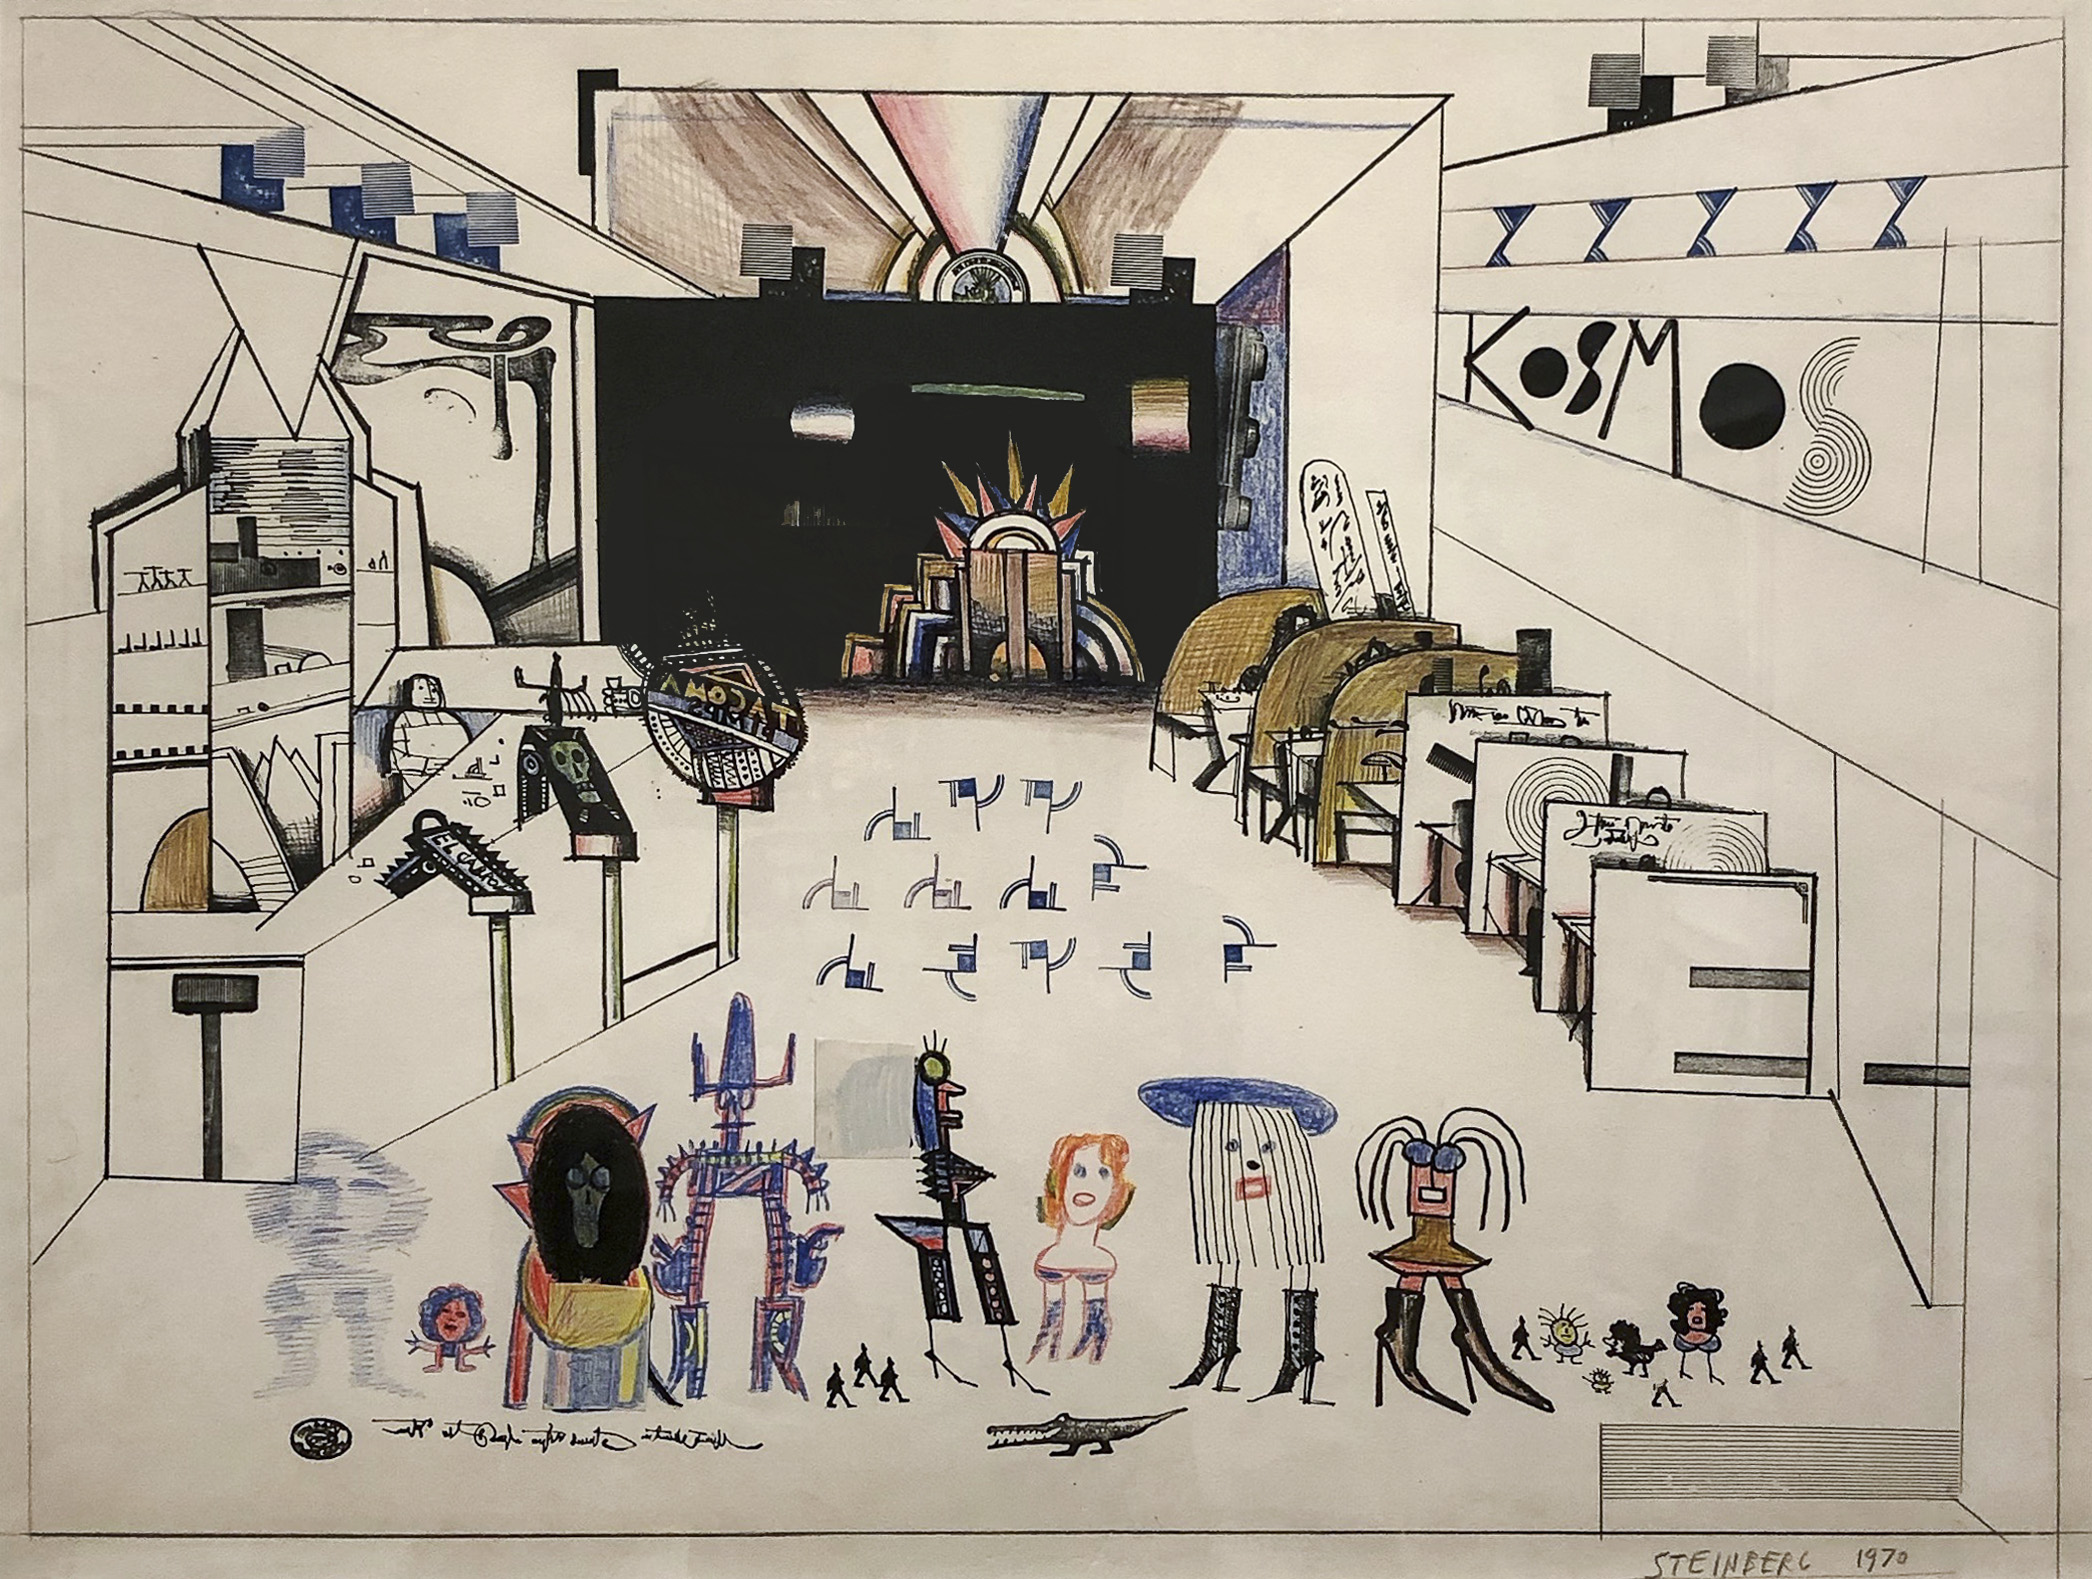 Drawing by Saul Steinberg depicting characters at Cafe with fun elements